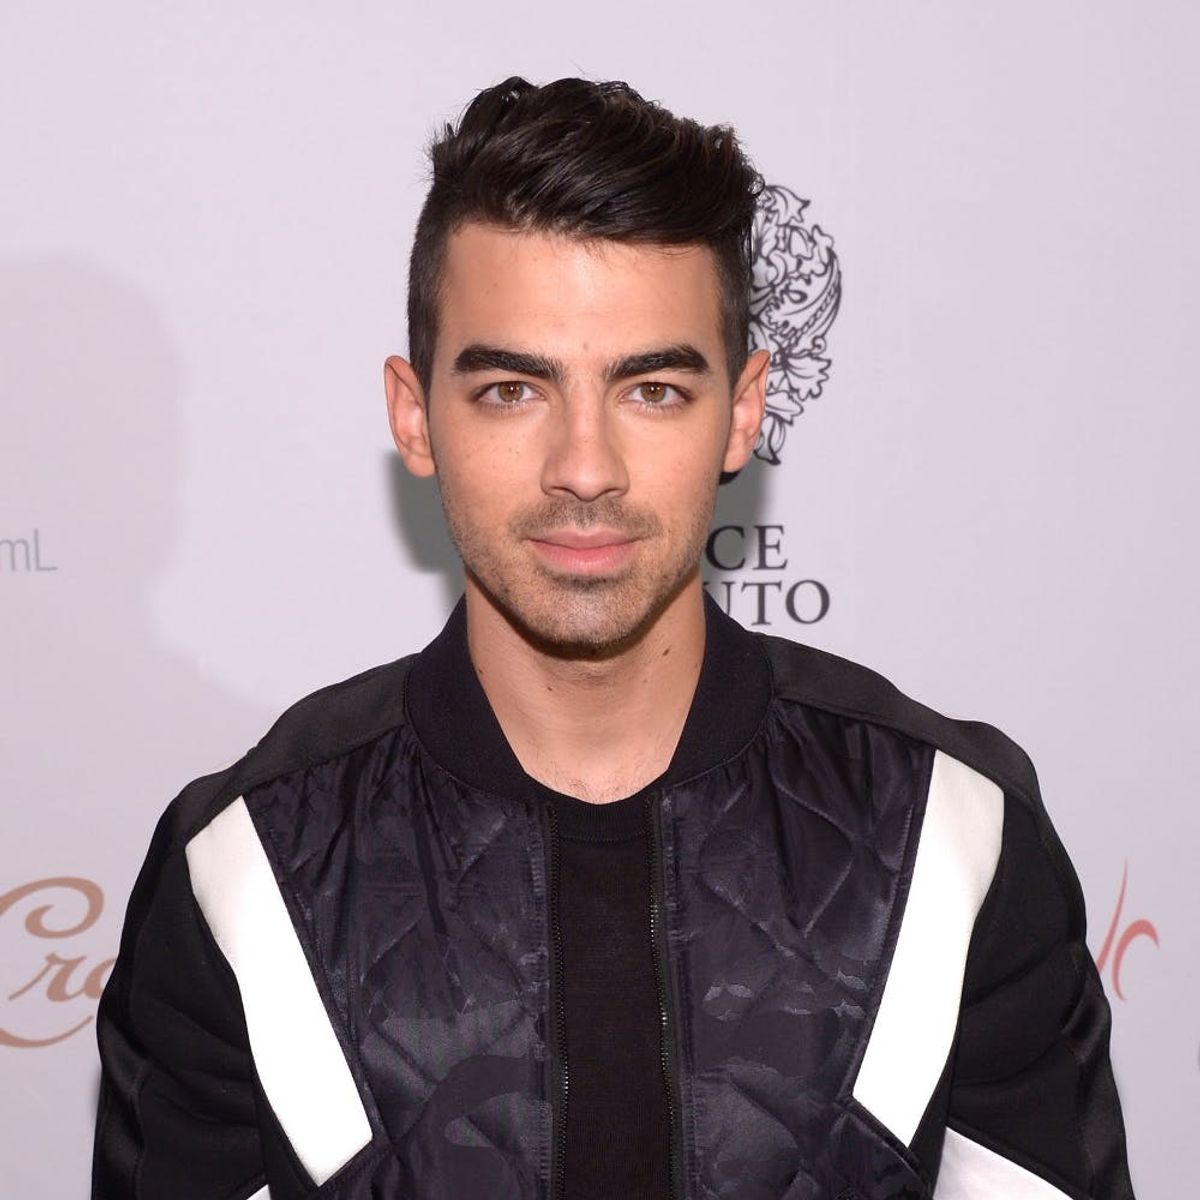 Joe Jonas Just Revealed the Actress He Ditched His Purity Ring For